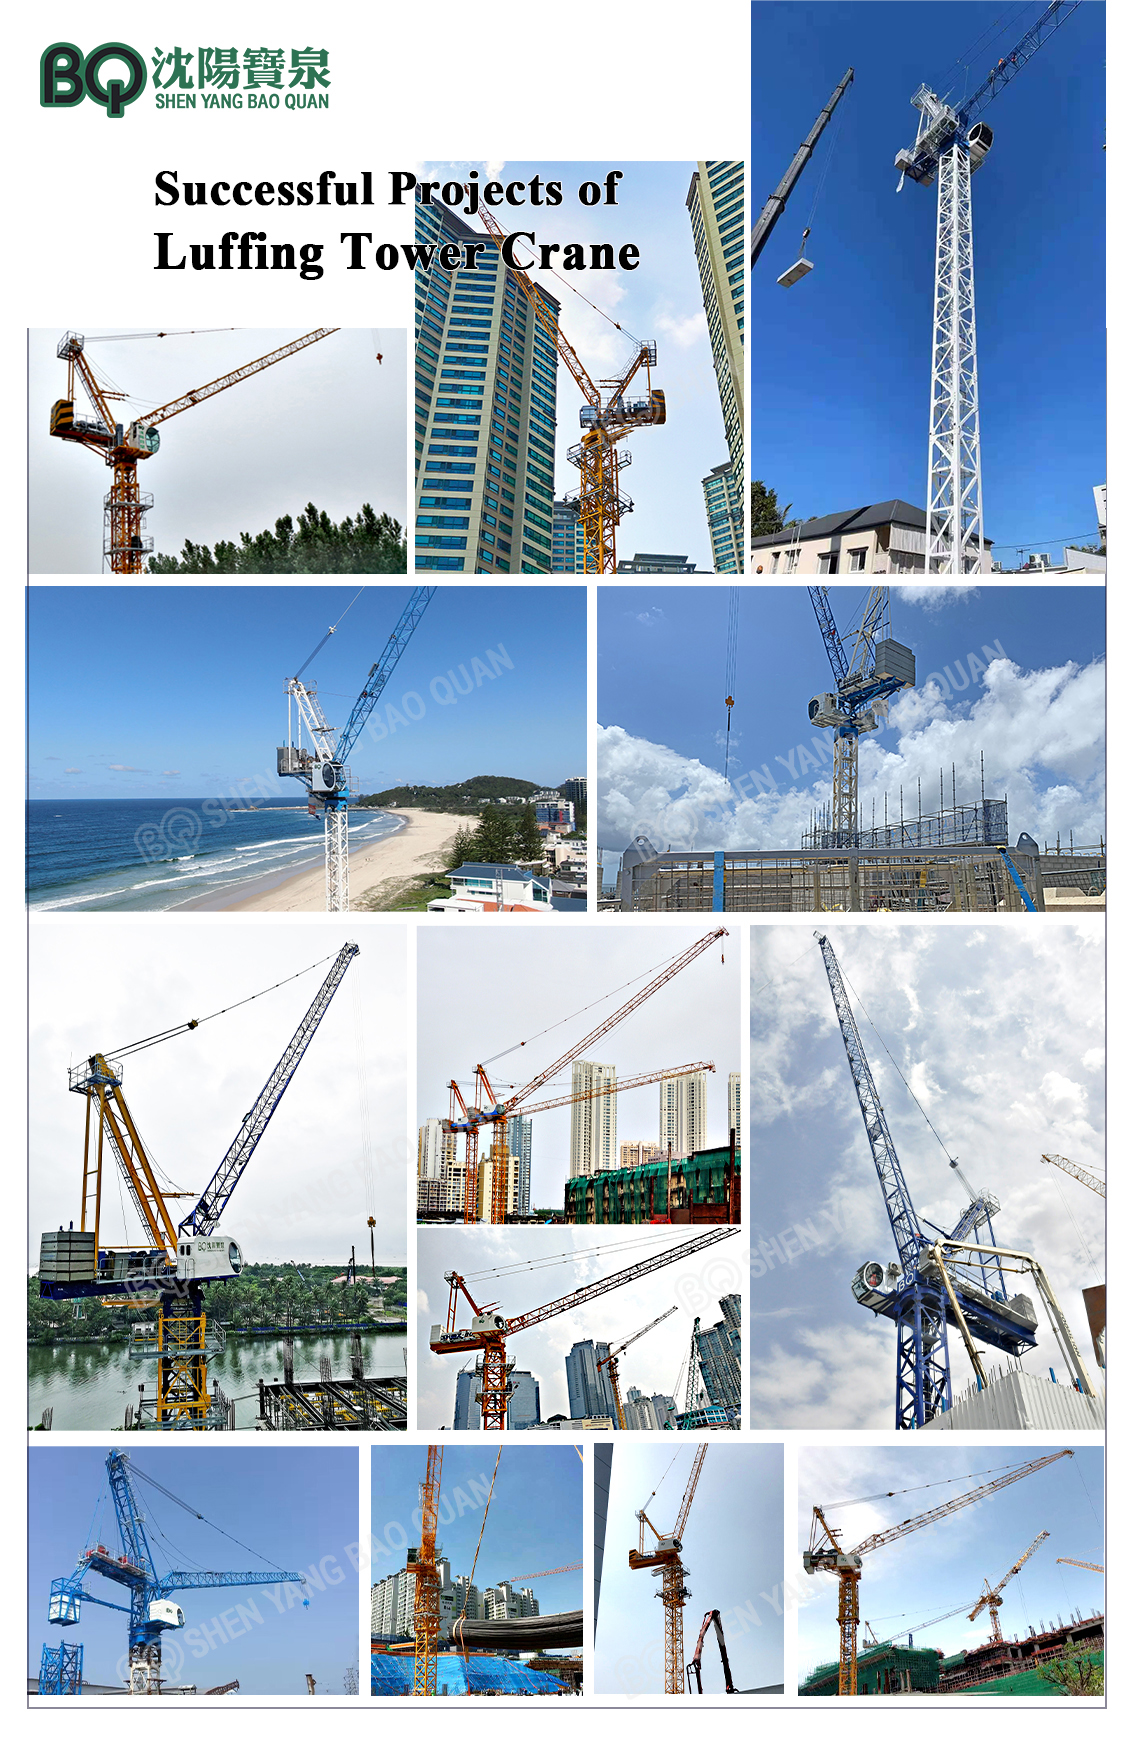 Luffing Tower Crane Cases